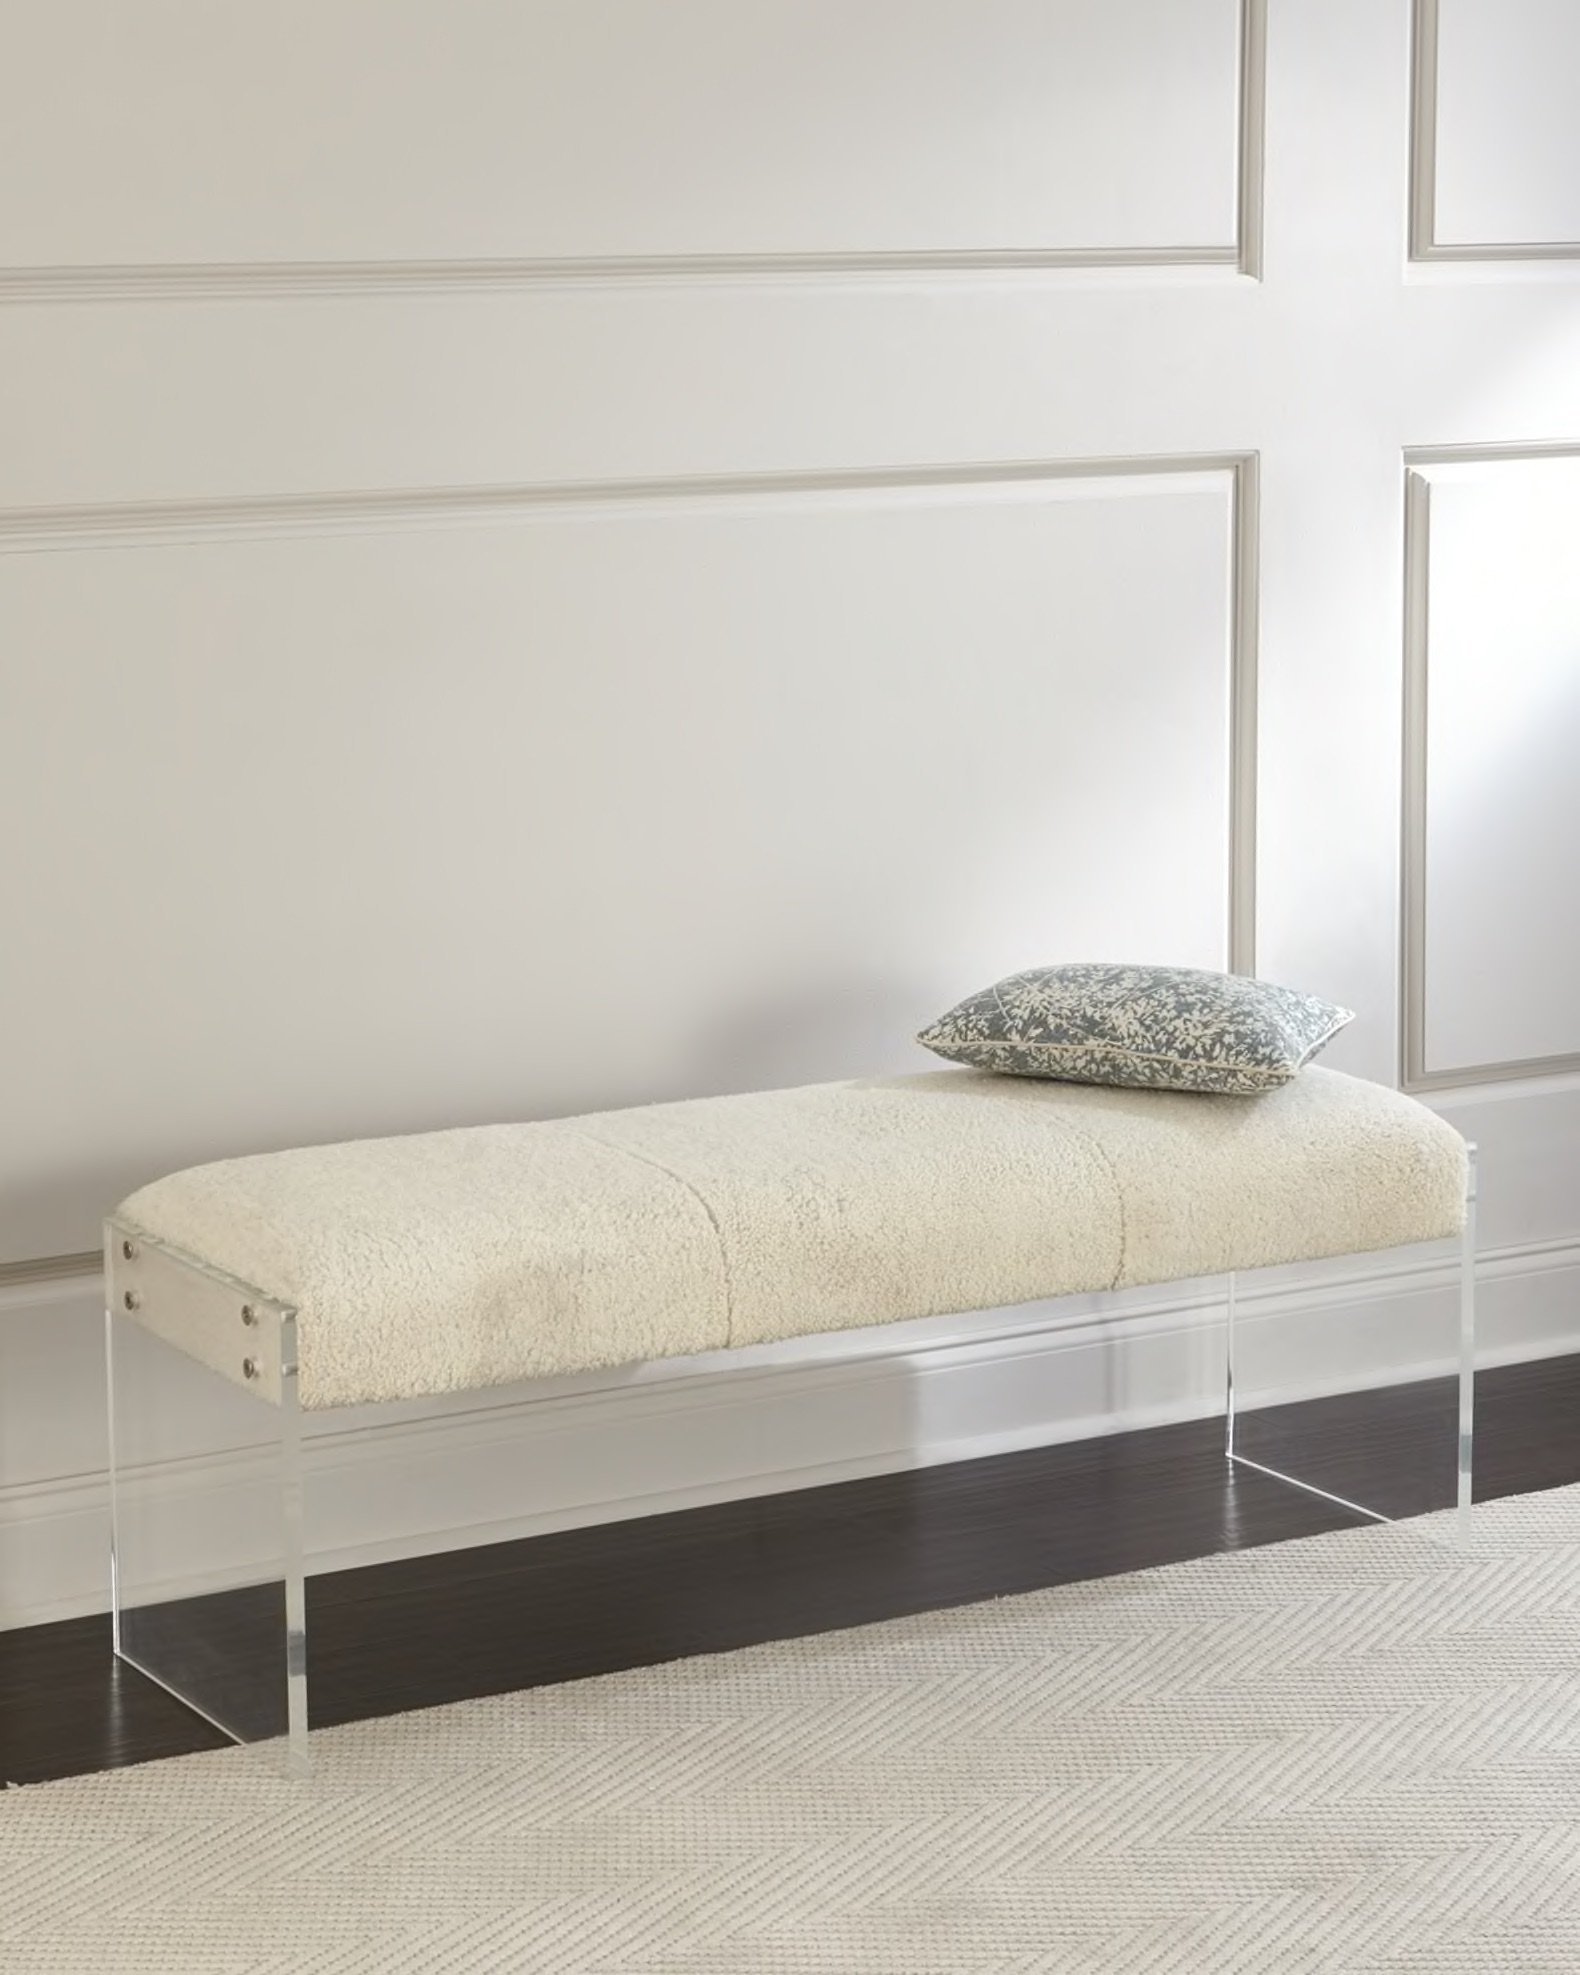 A cream shearling seat atop the sleek acrylic Aiden bench creates a decadent combination that not only offers comfort but also adds a touch of contemporary style to any space. I'm in love with the way the plush texture of the shearling contrasts with